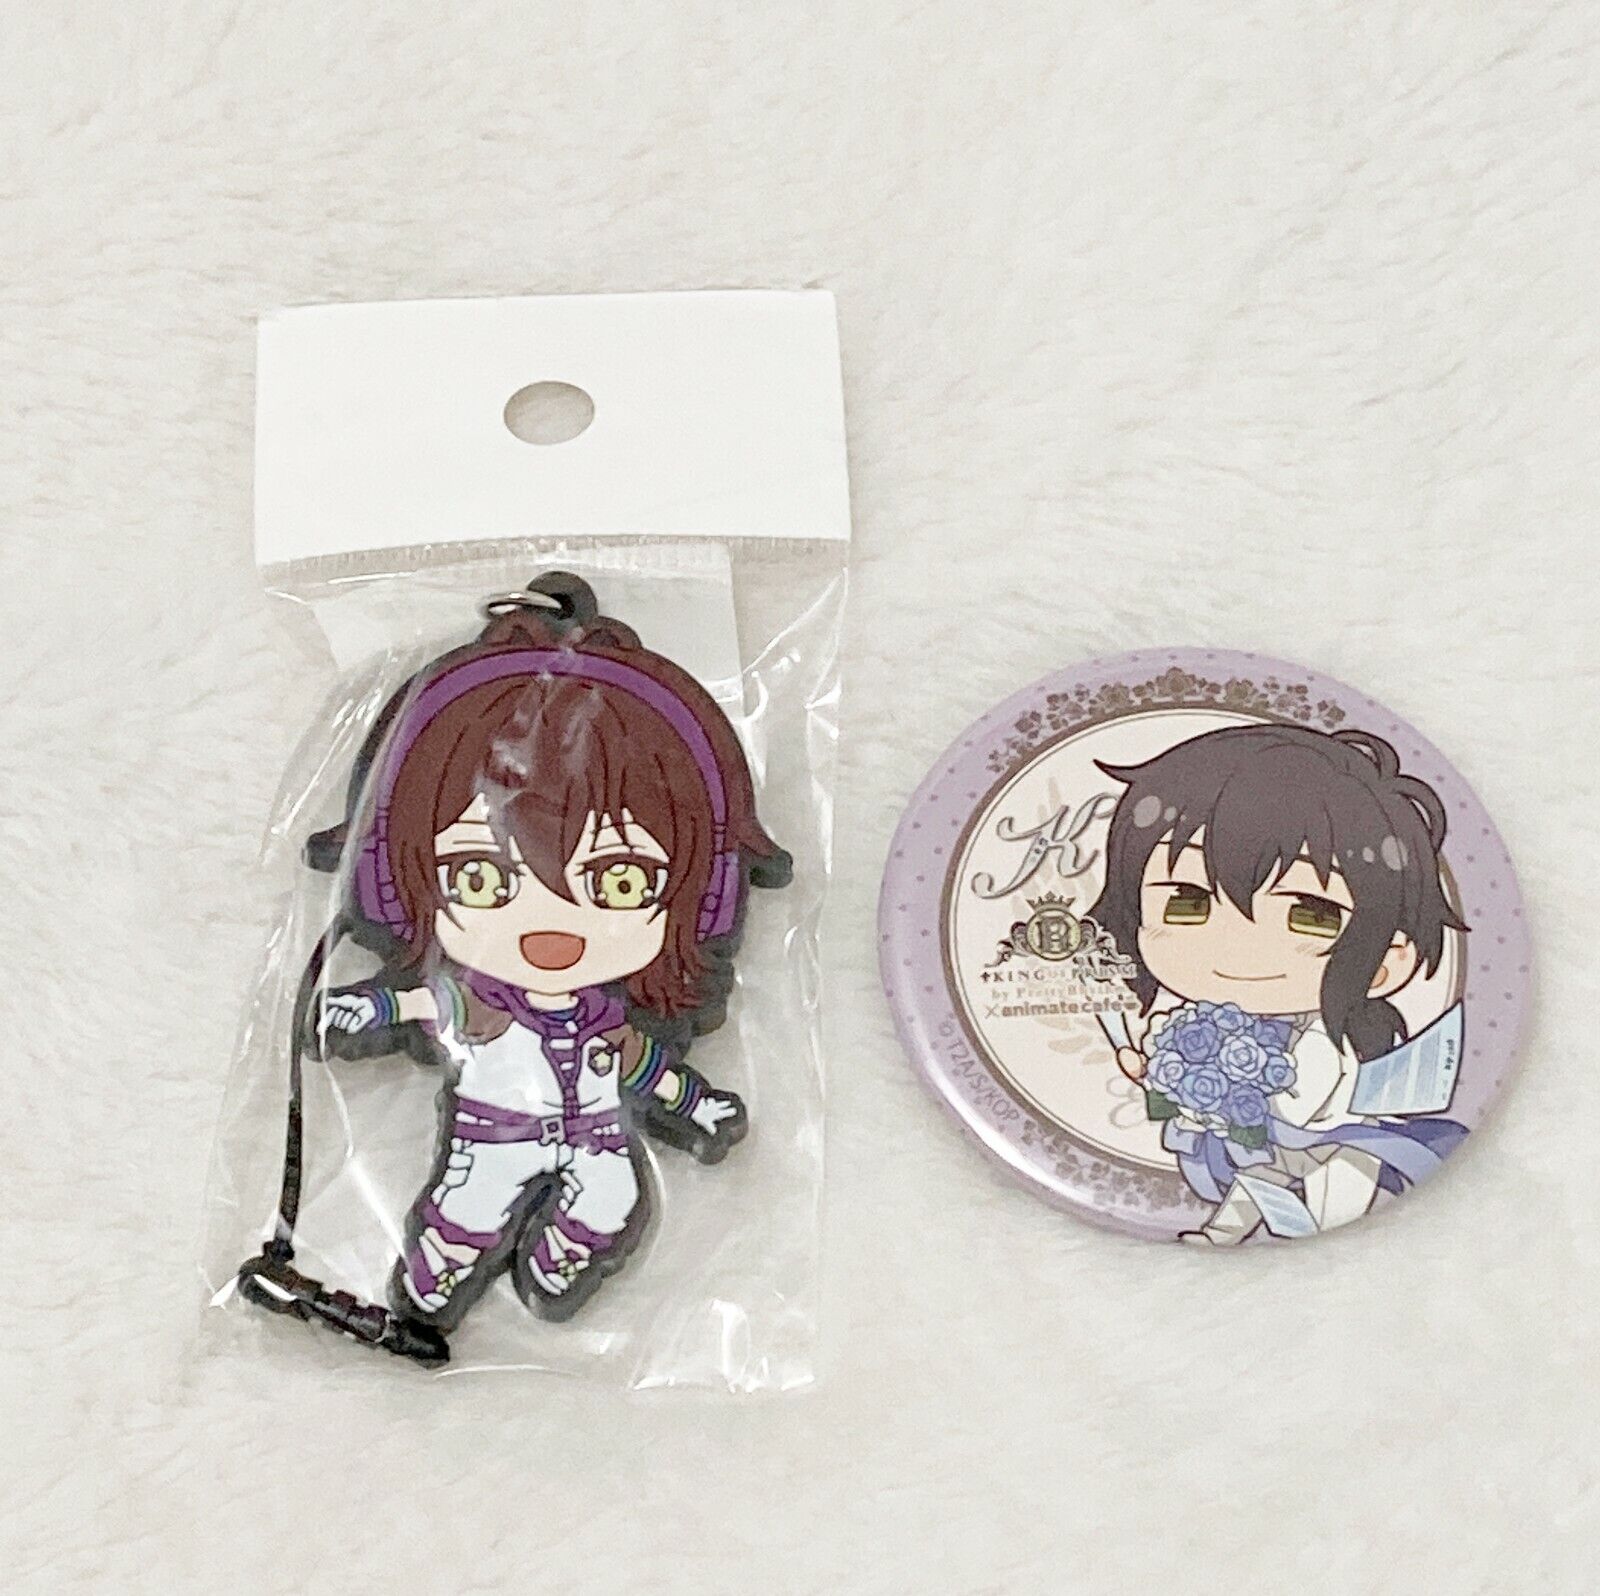 King of Prism Shiny Seven Stars, Kouji Mihama Button and Rubber Bag Phone Charm